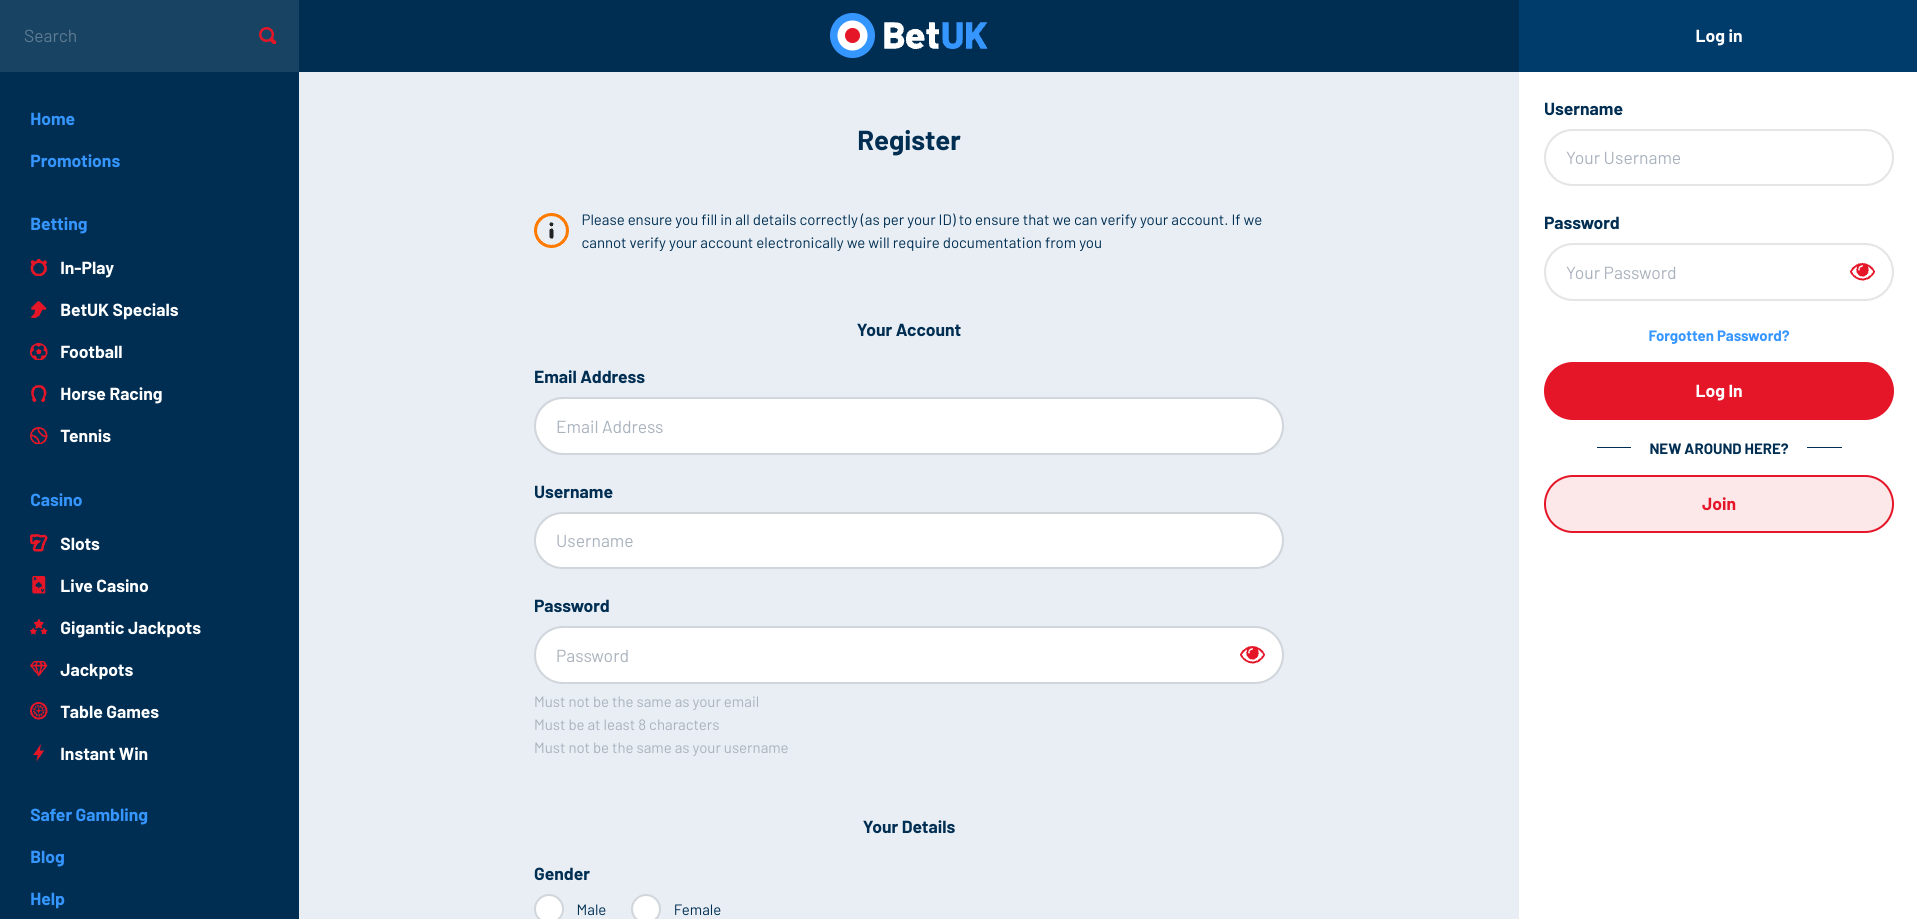 How to claim Free bets at Bet UK